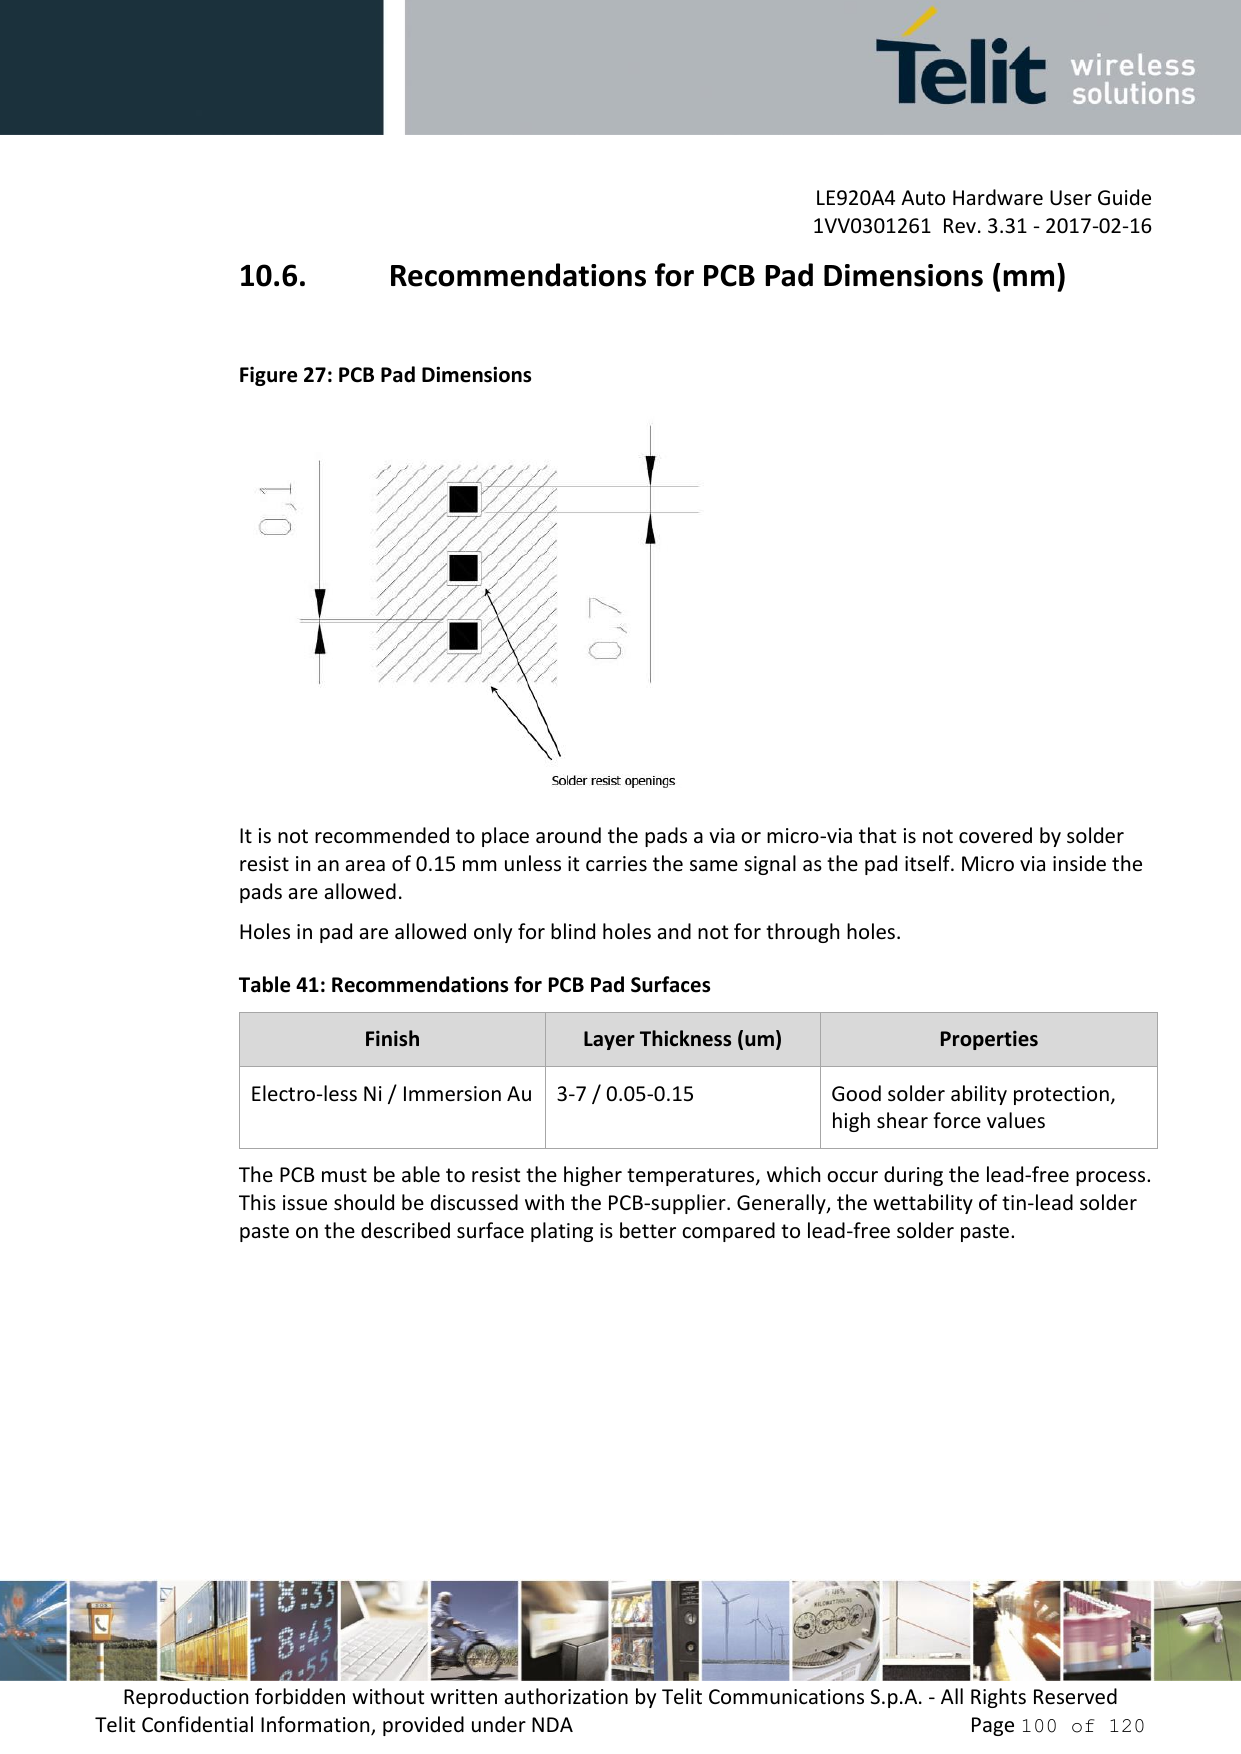 LE920A4 Auto Hardware User Guide 1VV0301261  Rev. 3.31 - 2017-02-16 Reproduction forbidden without written authorization by Telit Communications S.p.A. - All Rights Reserved Telit Confidential Information, provided under NDA   Page 100 of 120 10.6. Recommendations for PCB Pad Dimensions (mm) Figure 27: PCB Pad Dimensions It is not recommended to place around the pads a via or micro-via that is not covered by solder resist in an area of 0.15 mm unless it carries the same signal as the pad itself. Micro via inside the pads are allowed. Holes in pad are allowed only for blind holes and not for through holes. Table 41: Recommendations for PCB Pad Surfaces Finish Layer Thickness (um) Properties Electro-less Ni / Immersion Au 3-7 / 0.05-0.15Good solder ability protection, high shear force values The PCB must be able to resist the higher temperatures, which occur during the lead-free process. This issue should be discussed with the PCB-supplier. Generally, the wettability of tin-lead solder paste on the described surface plating is better compared to lead-free solder paste. 